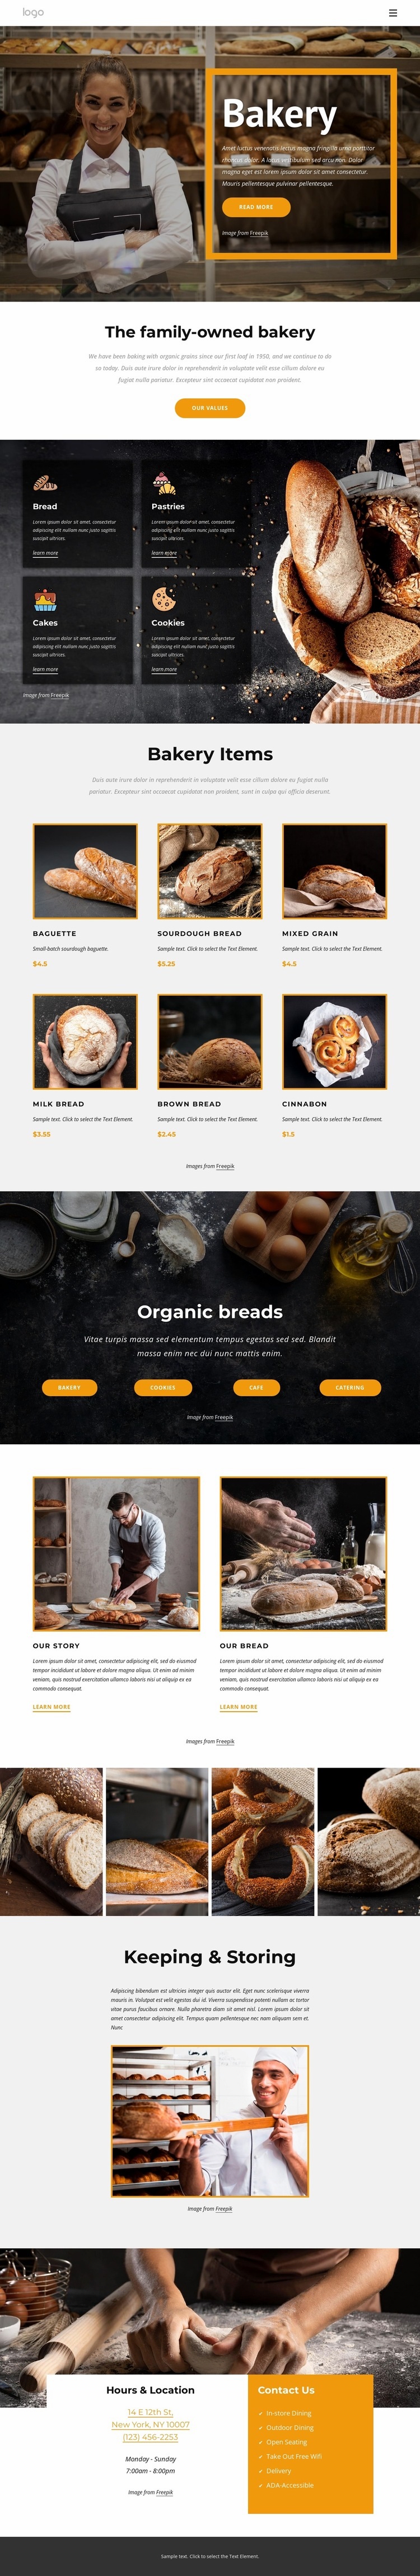 The family-owned bakery Squarespace Template Alternative